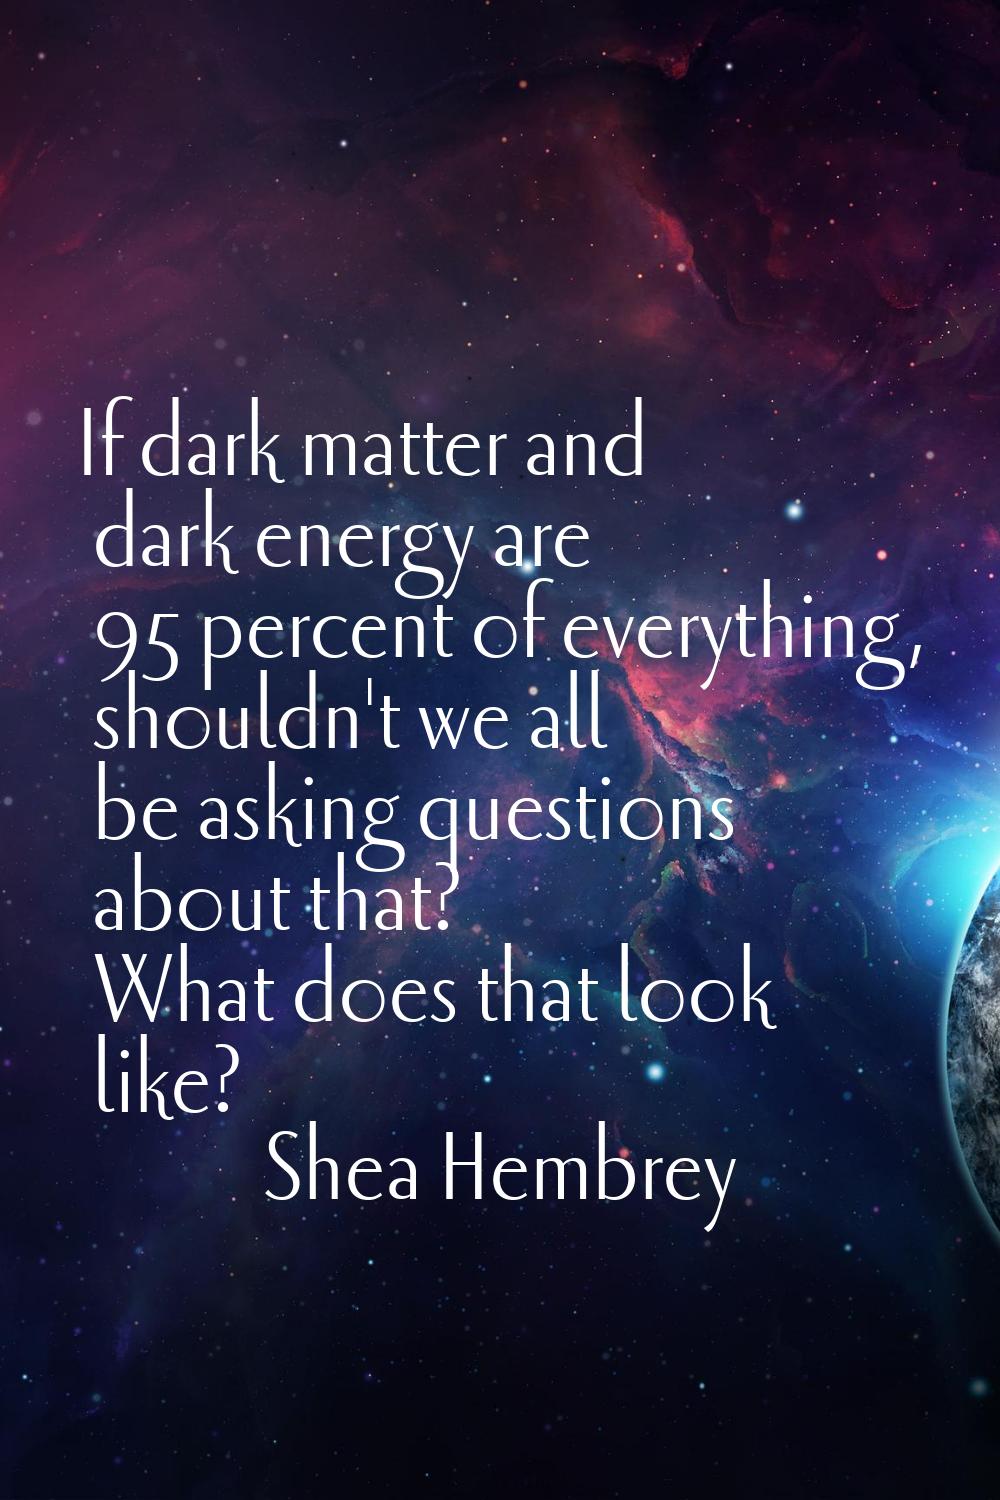 If dark matter and dark energy are 95 percent of everything, shouldn't we all be asking questions a